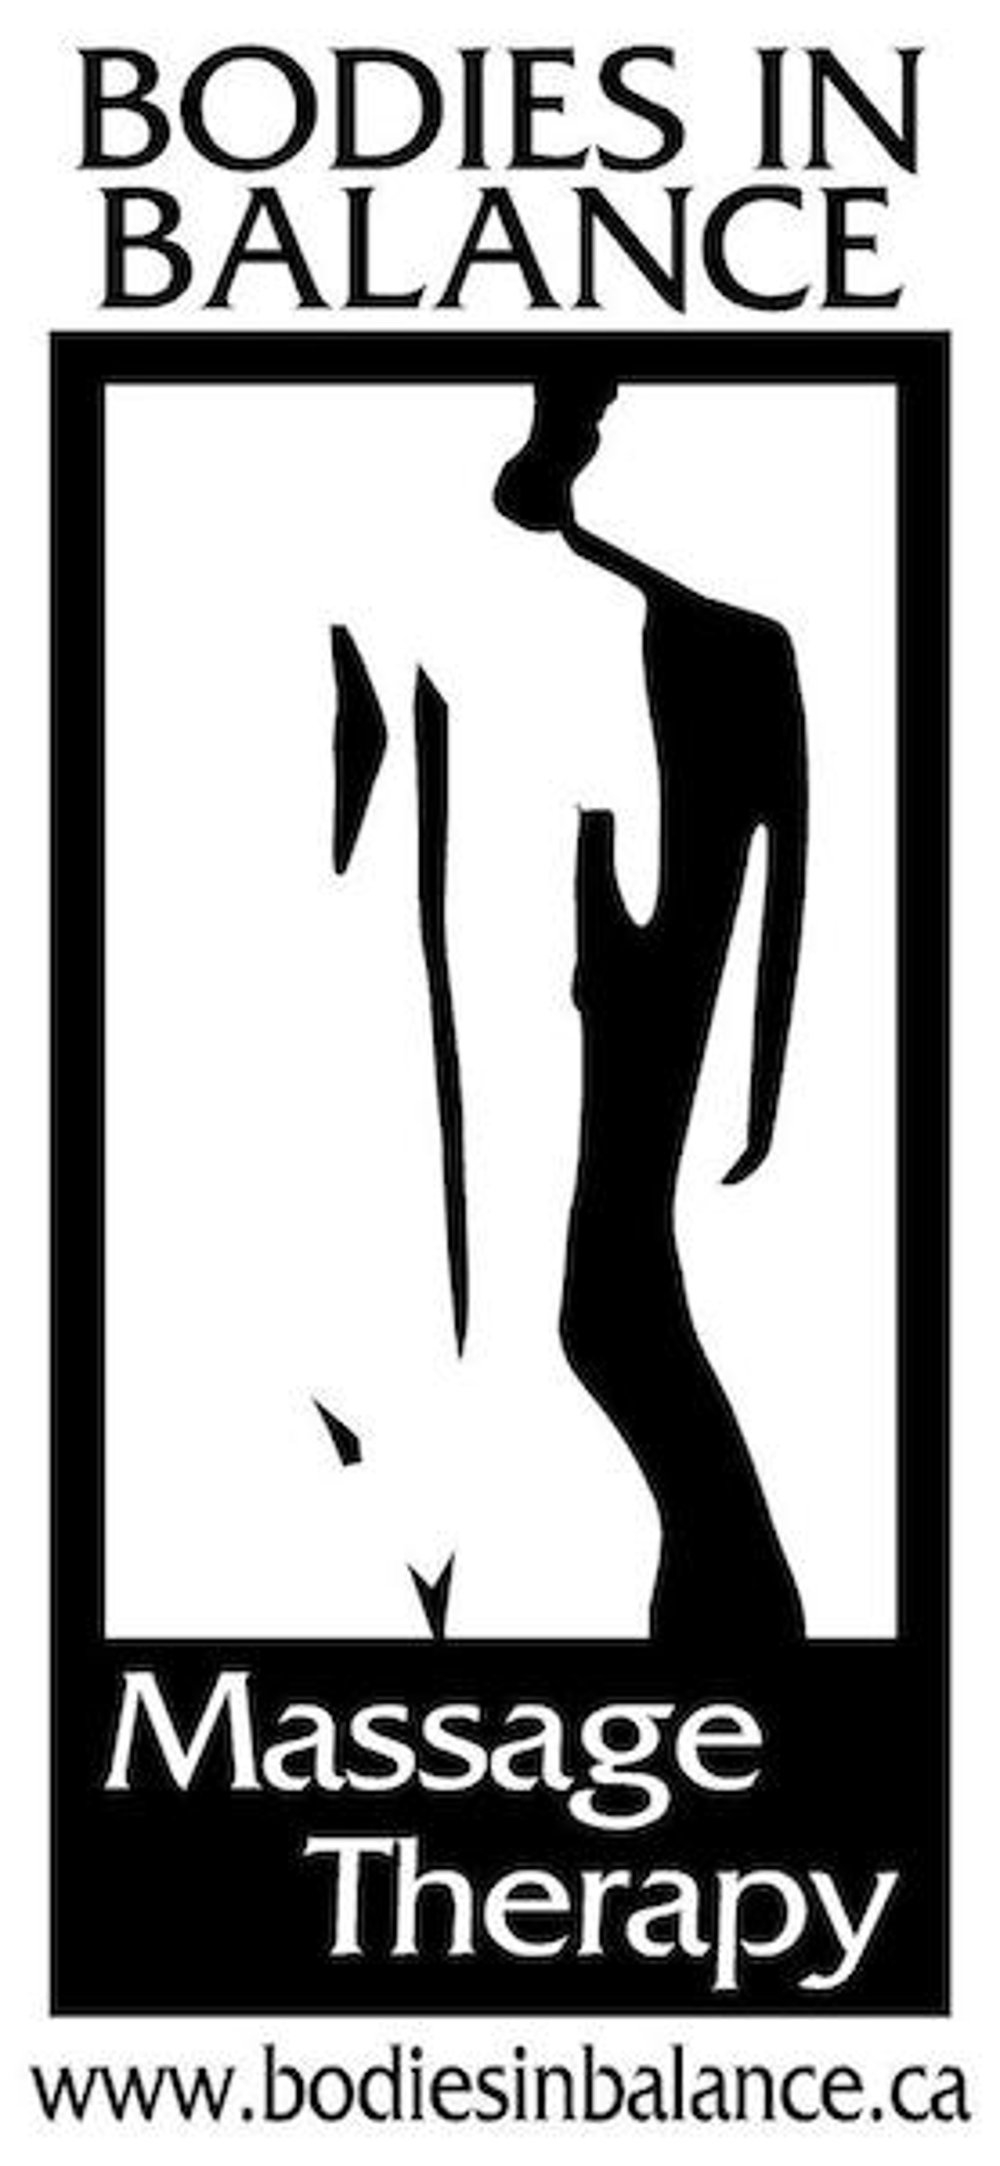 Bodies in Balance Logo - silhouette of a body with text 